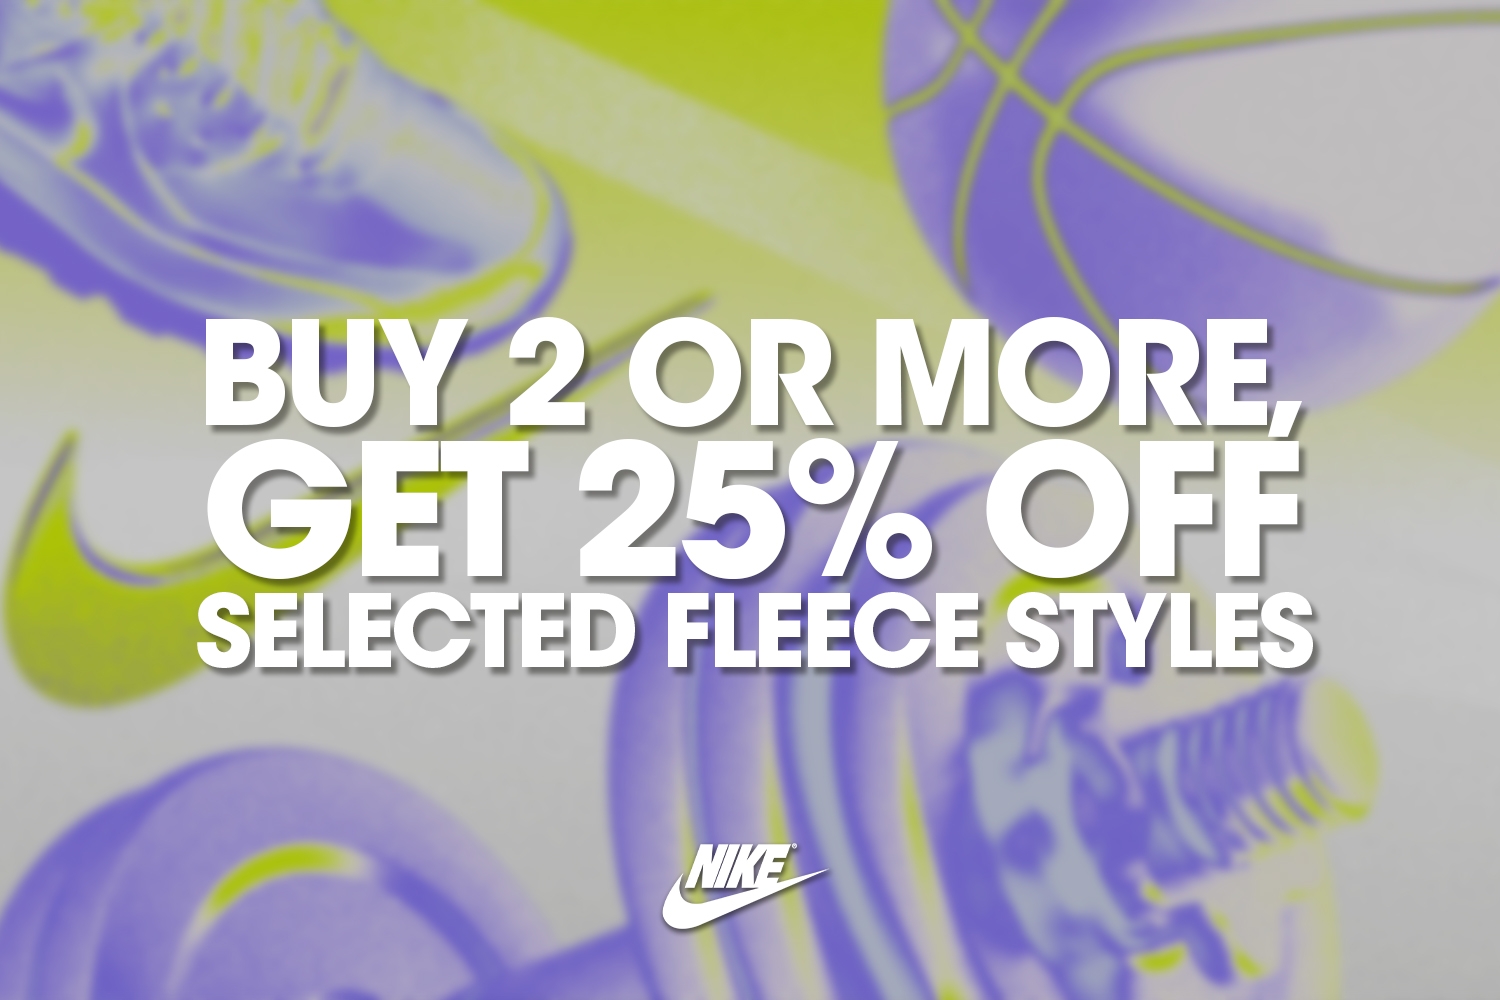 Buy two or more products at Nike and enjoy a 25% discount